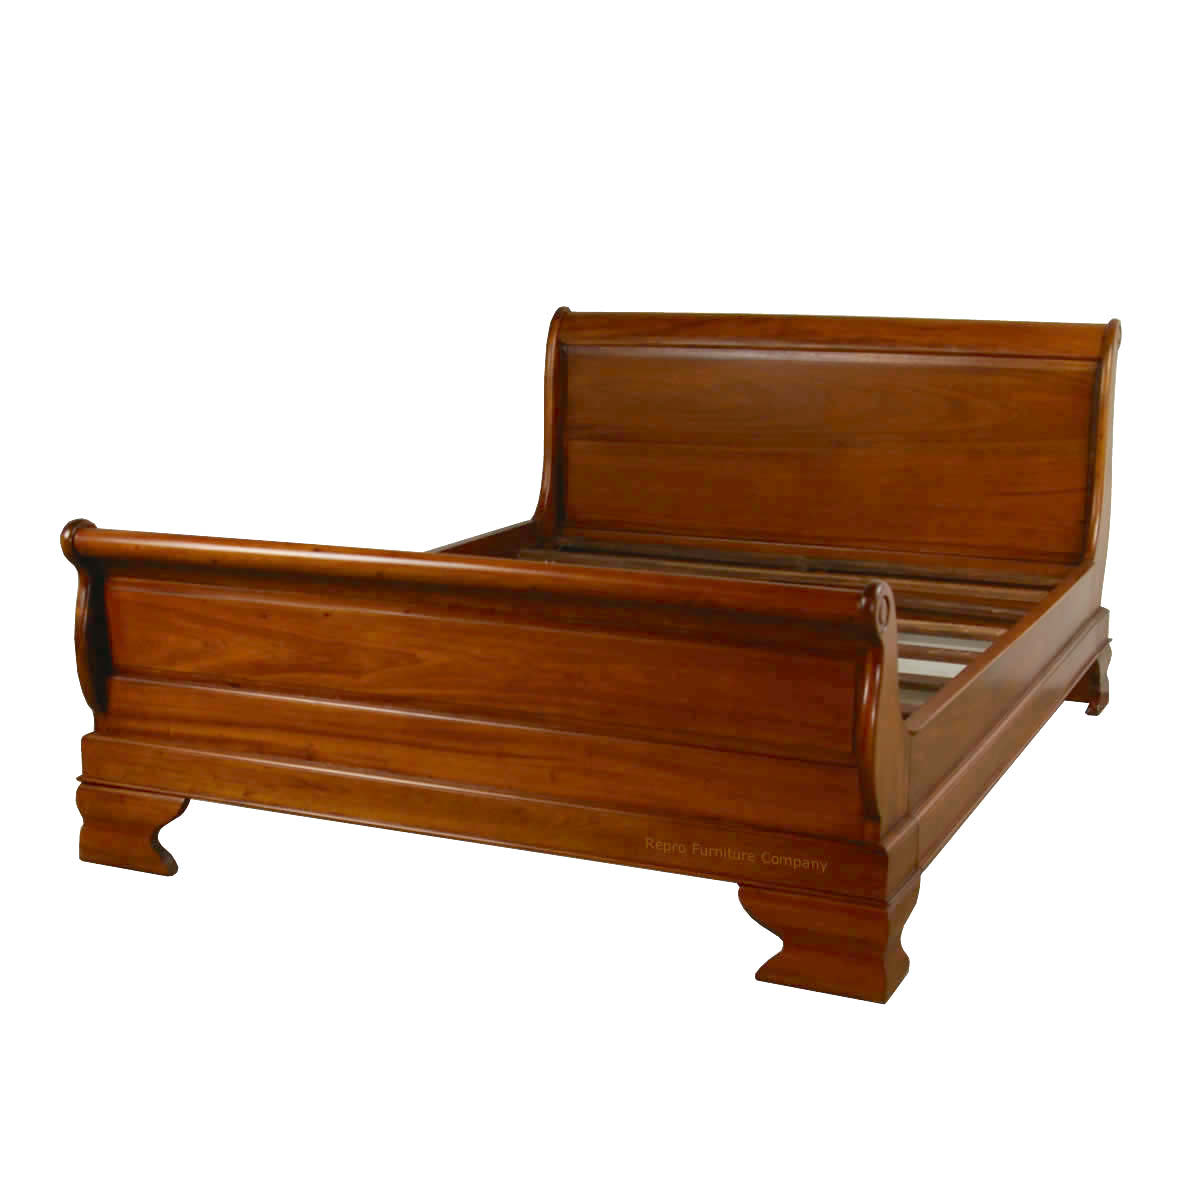 Mahogany Super King Sleigh Bed Repro, Wooden Sleigh Bed Super King Size Uk